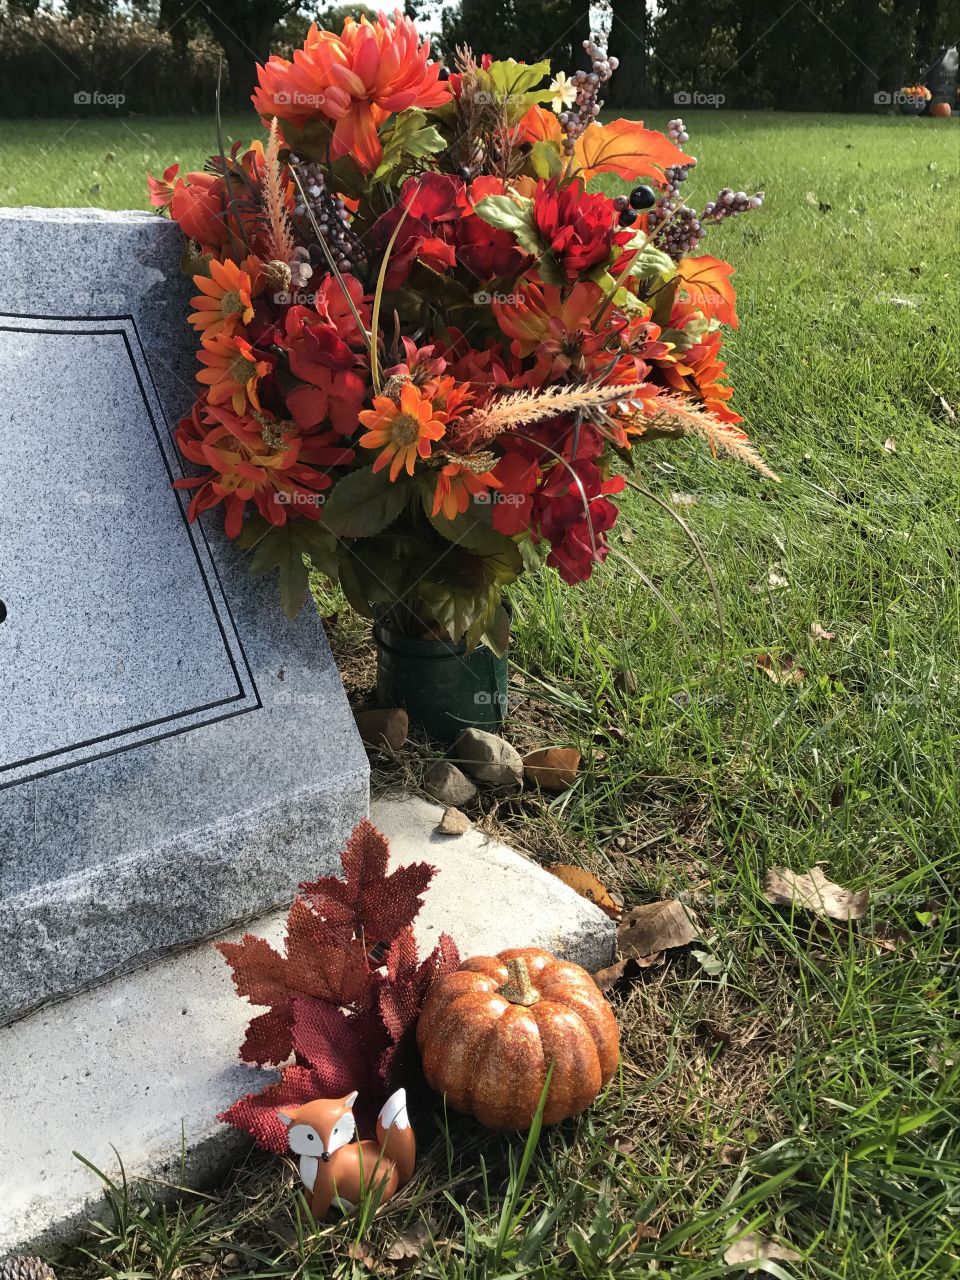 Someone placed a cute fox figurine and a bouquet of flowers next to a headstone.